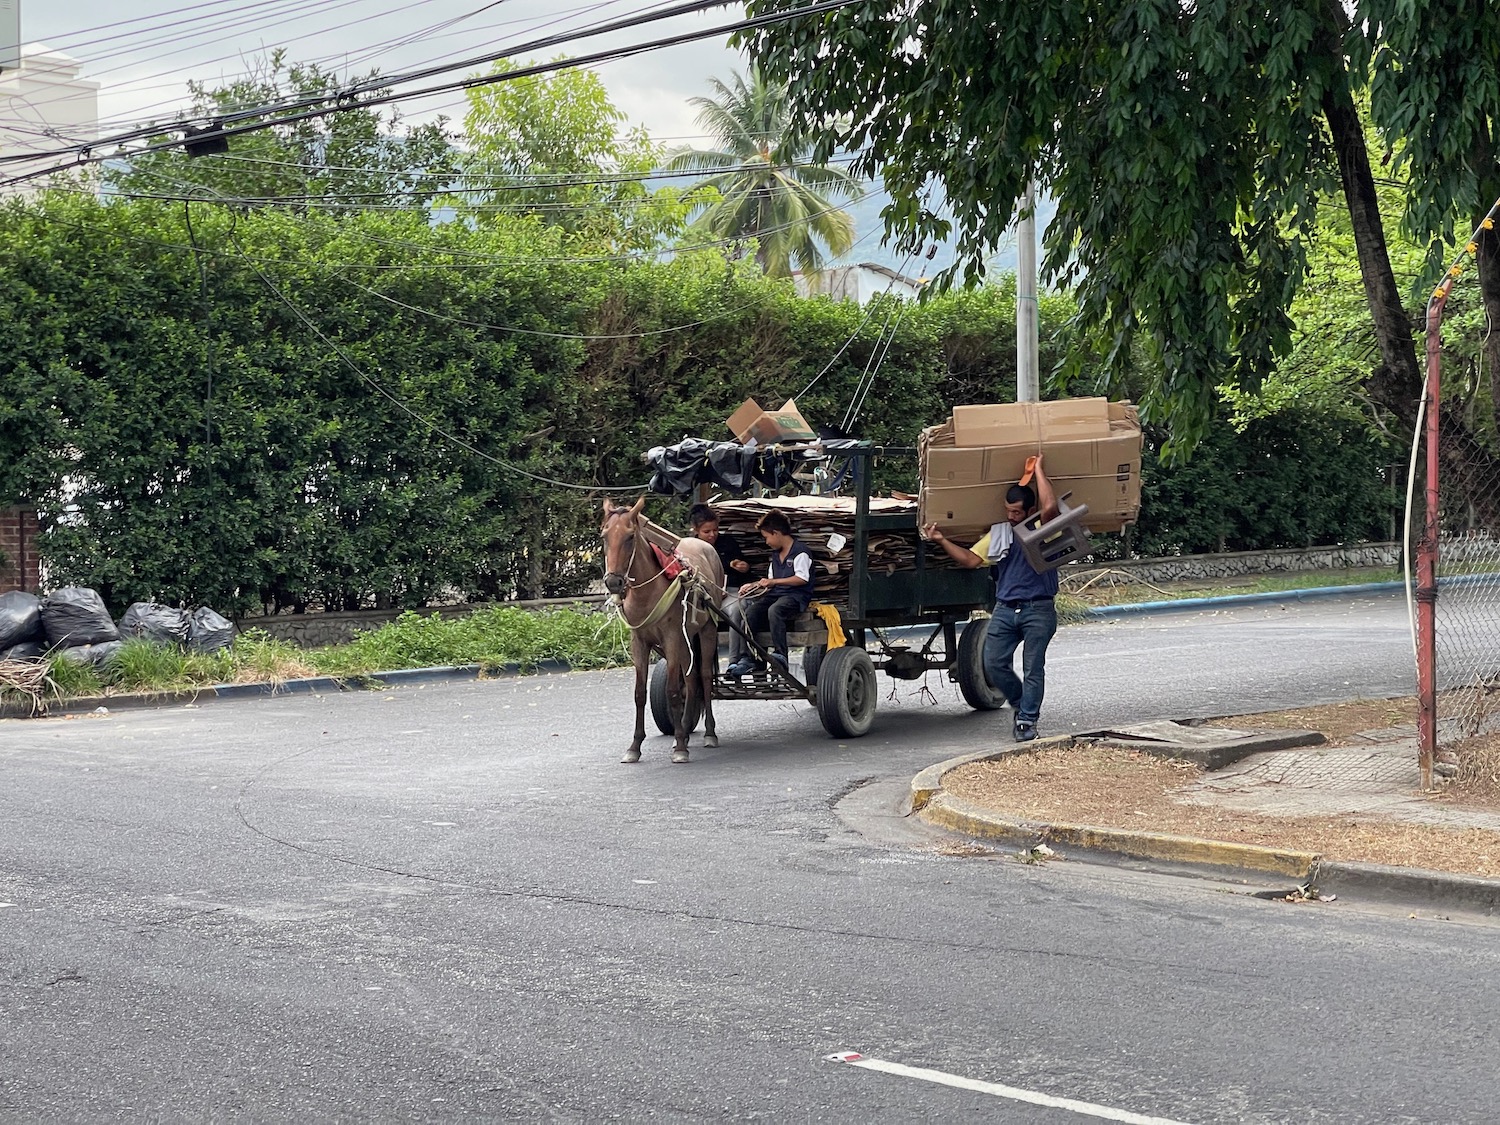 a horse pulling a cart with boxes and people on it